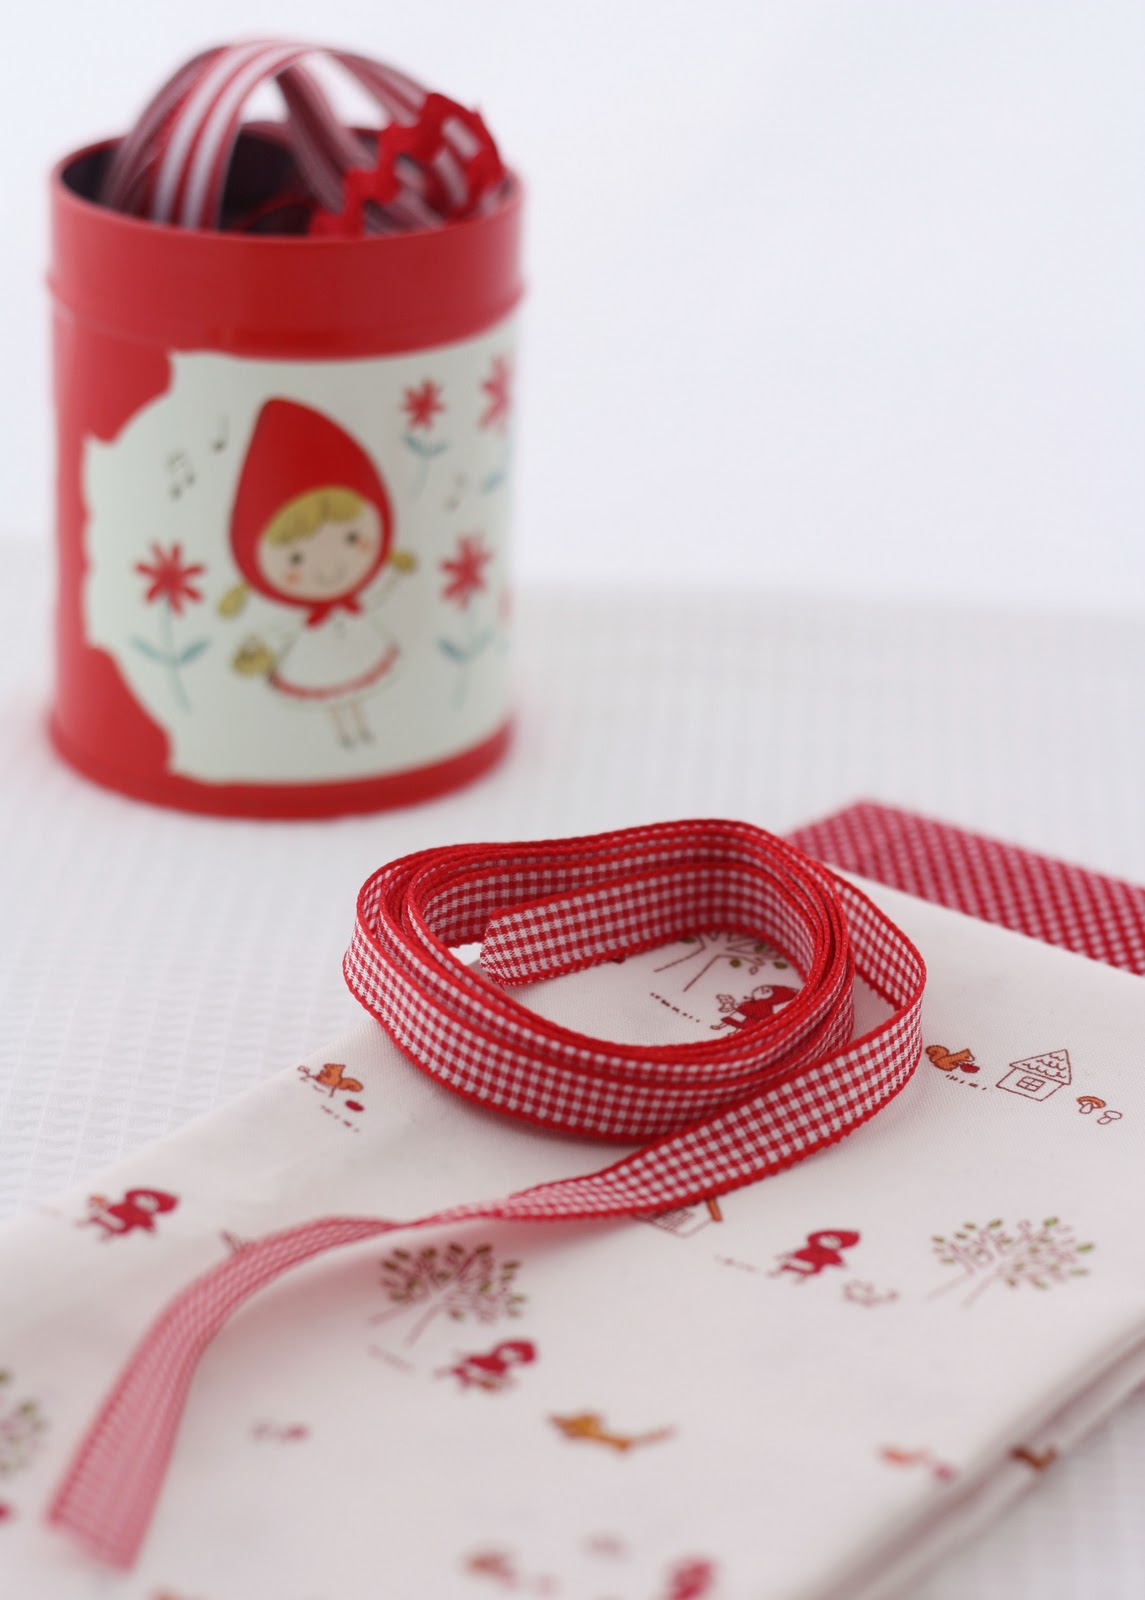 Sewing Gifts 101: Easy and Affordable Ideas for Your Crafty